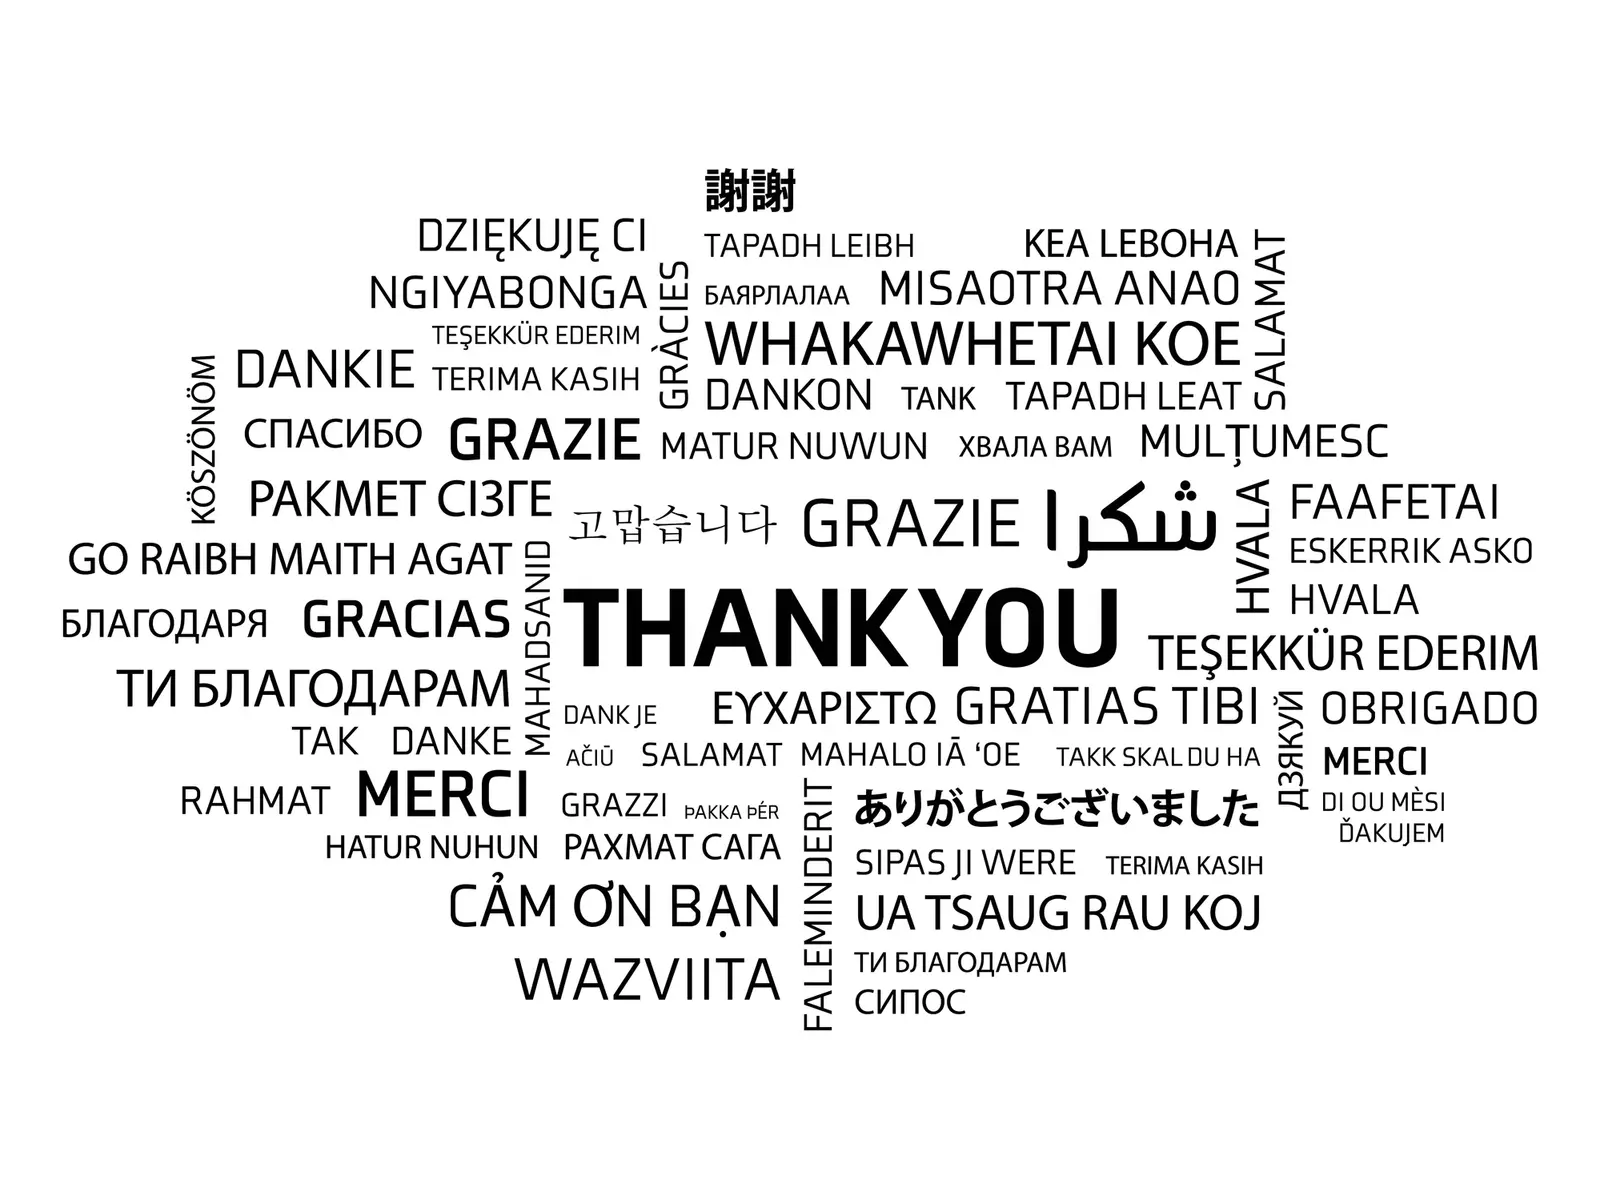 Thank you in various languages